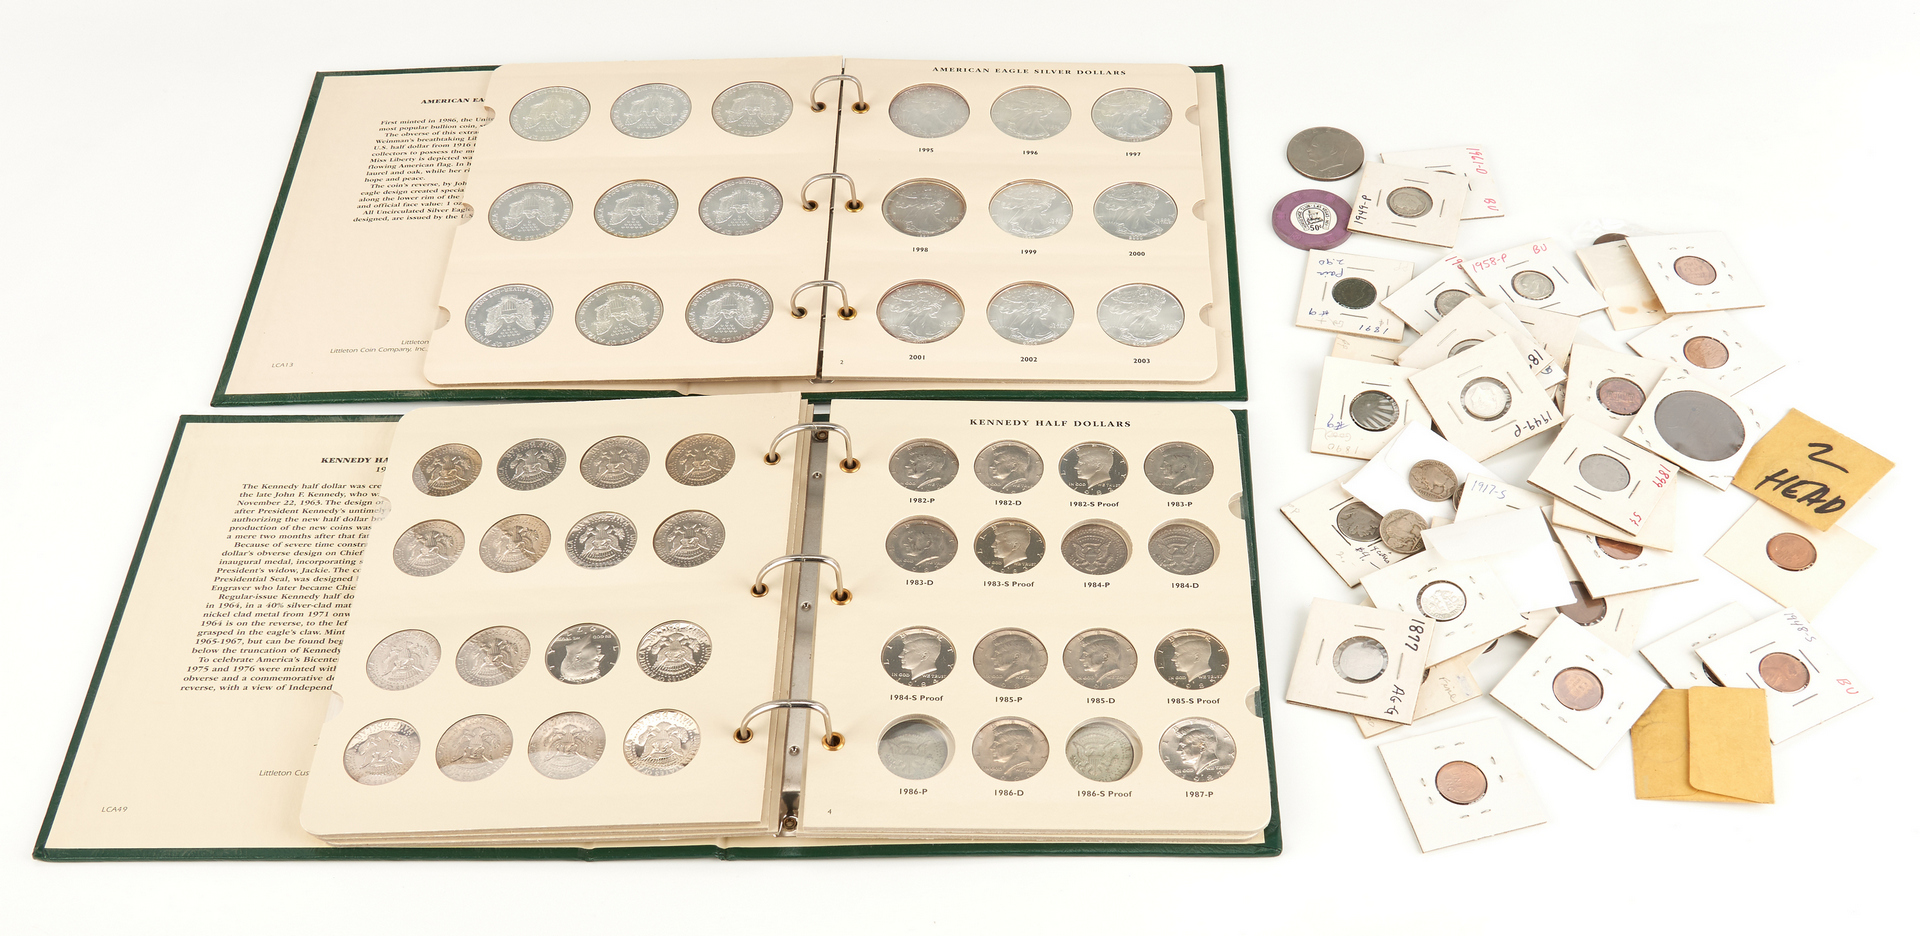 Lot 1169: 137 U.S. Mint Coins, incl. 90% Silver Coins